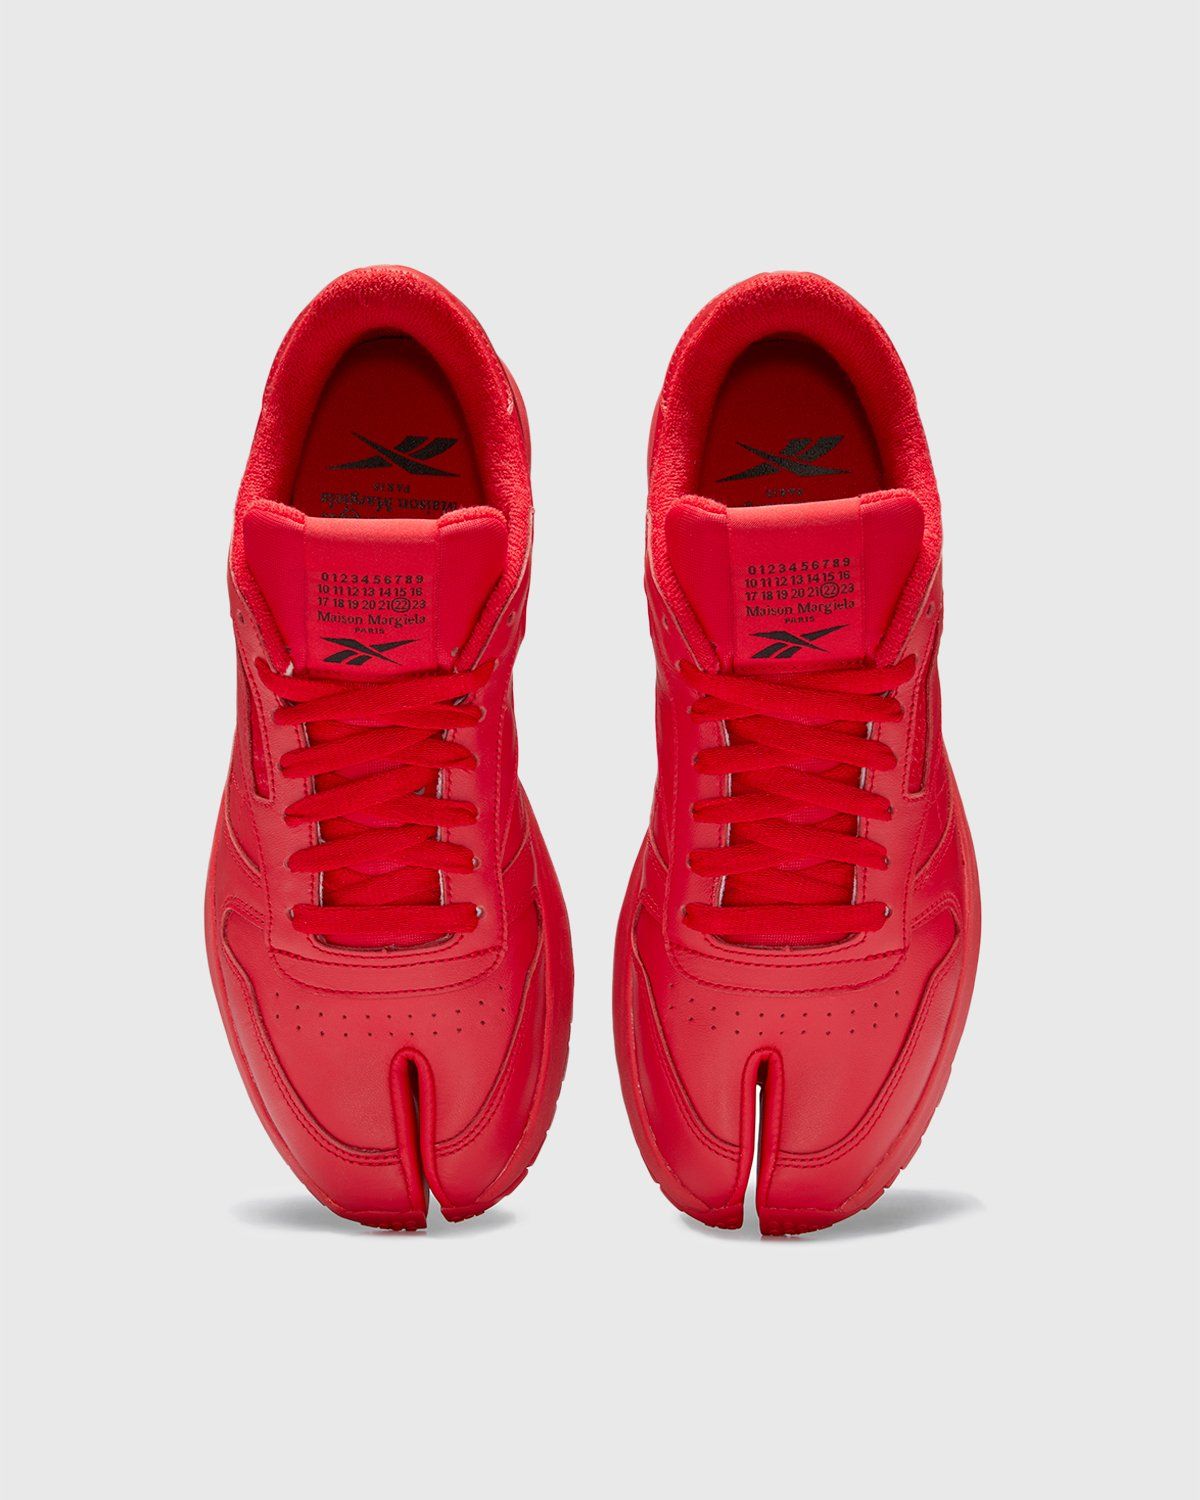 Maison Margiela x Reebok – Classic Leather Tabi Red - Low Top Sneakers - Red - Image 4